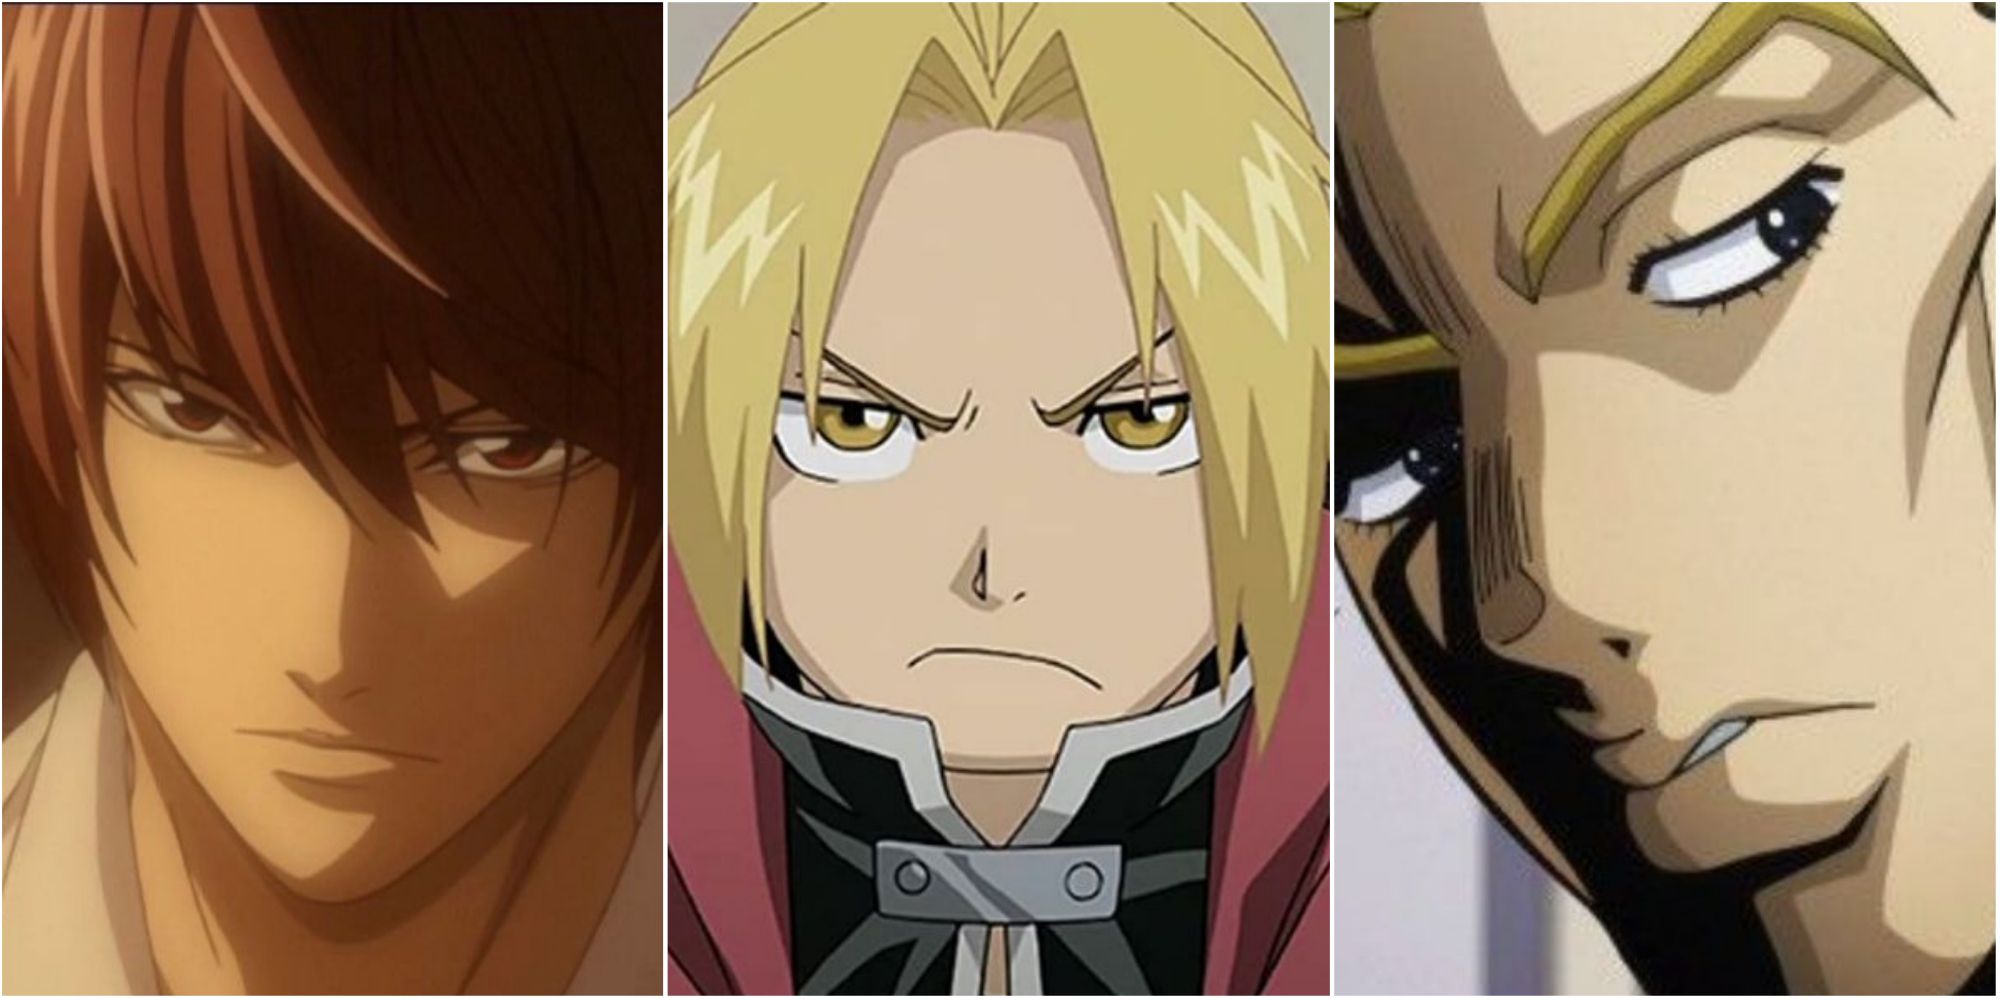 10 Popular Anime Characters Who Should Be Hated (But Surprisingly Never Are)